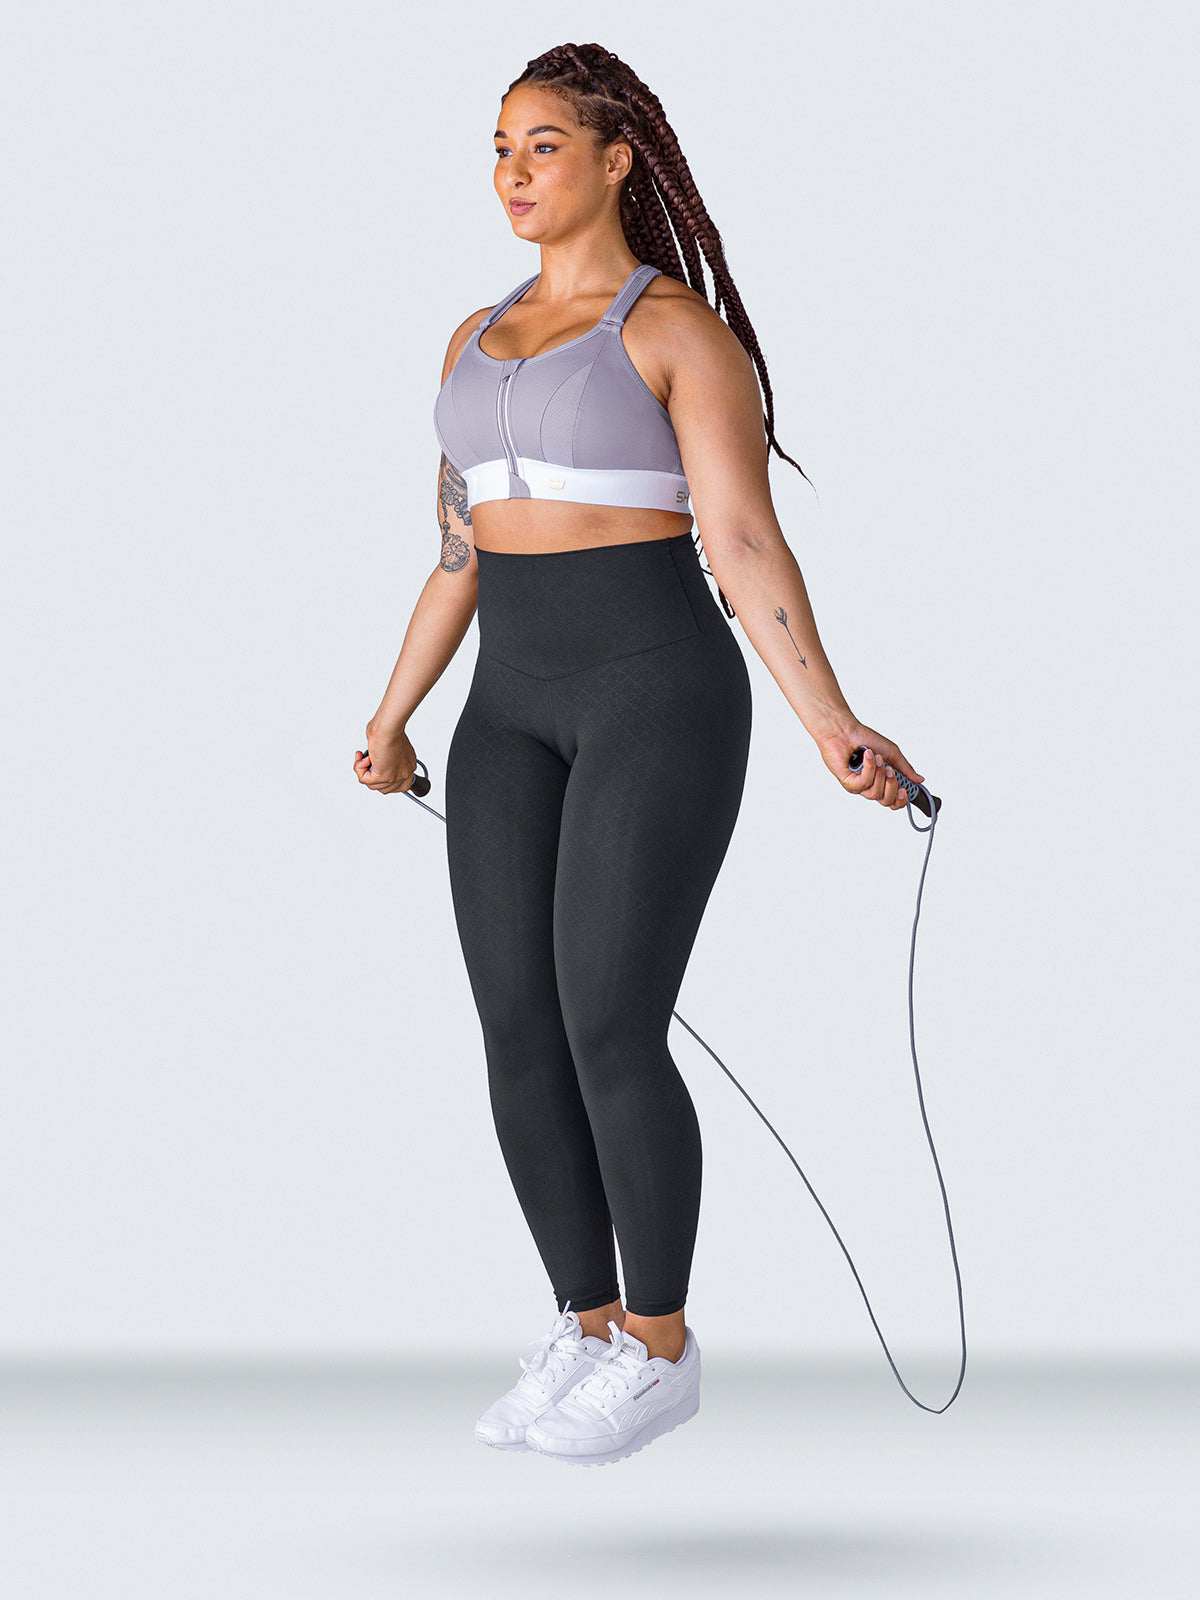 SHEFIT Built Adjustable Sports Bras to Give Active Women the